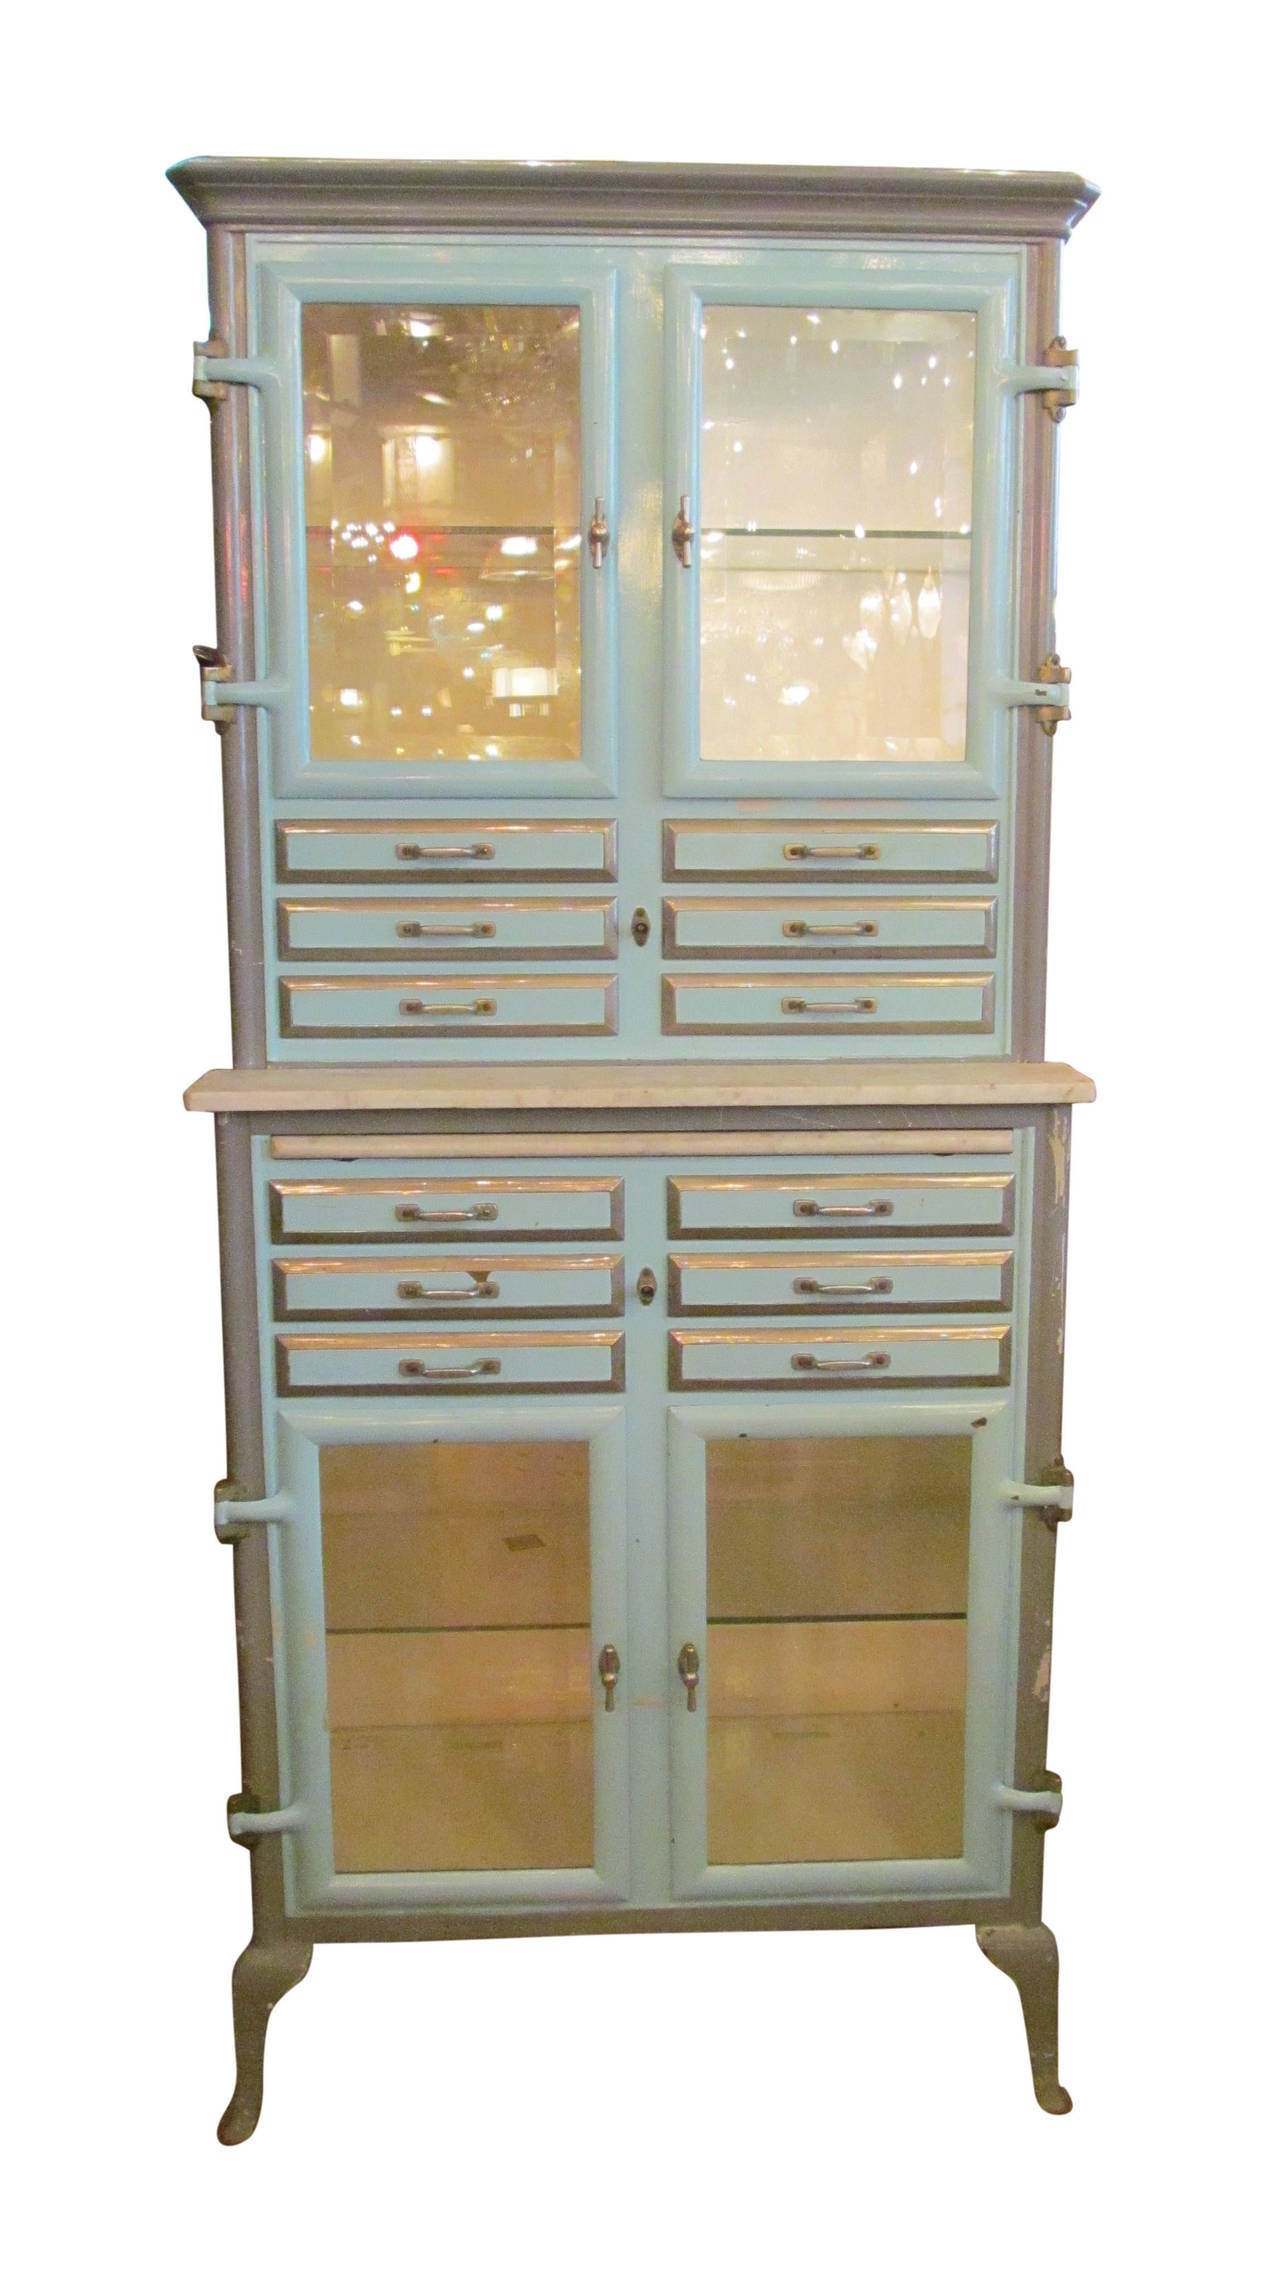 Made of metal with a marble ledge. Made in France. It features 12 drawers and two cabinets. This item is located at our 149 Madison Ave, New York, NY location.